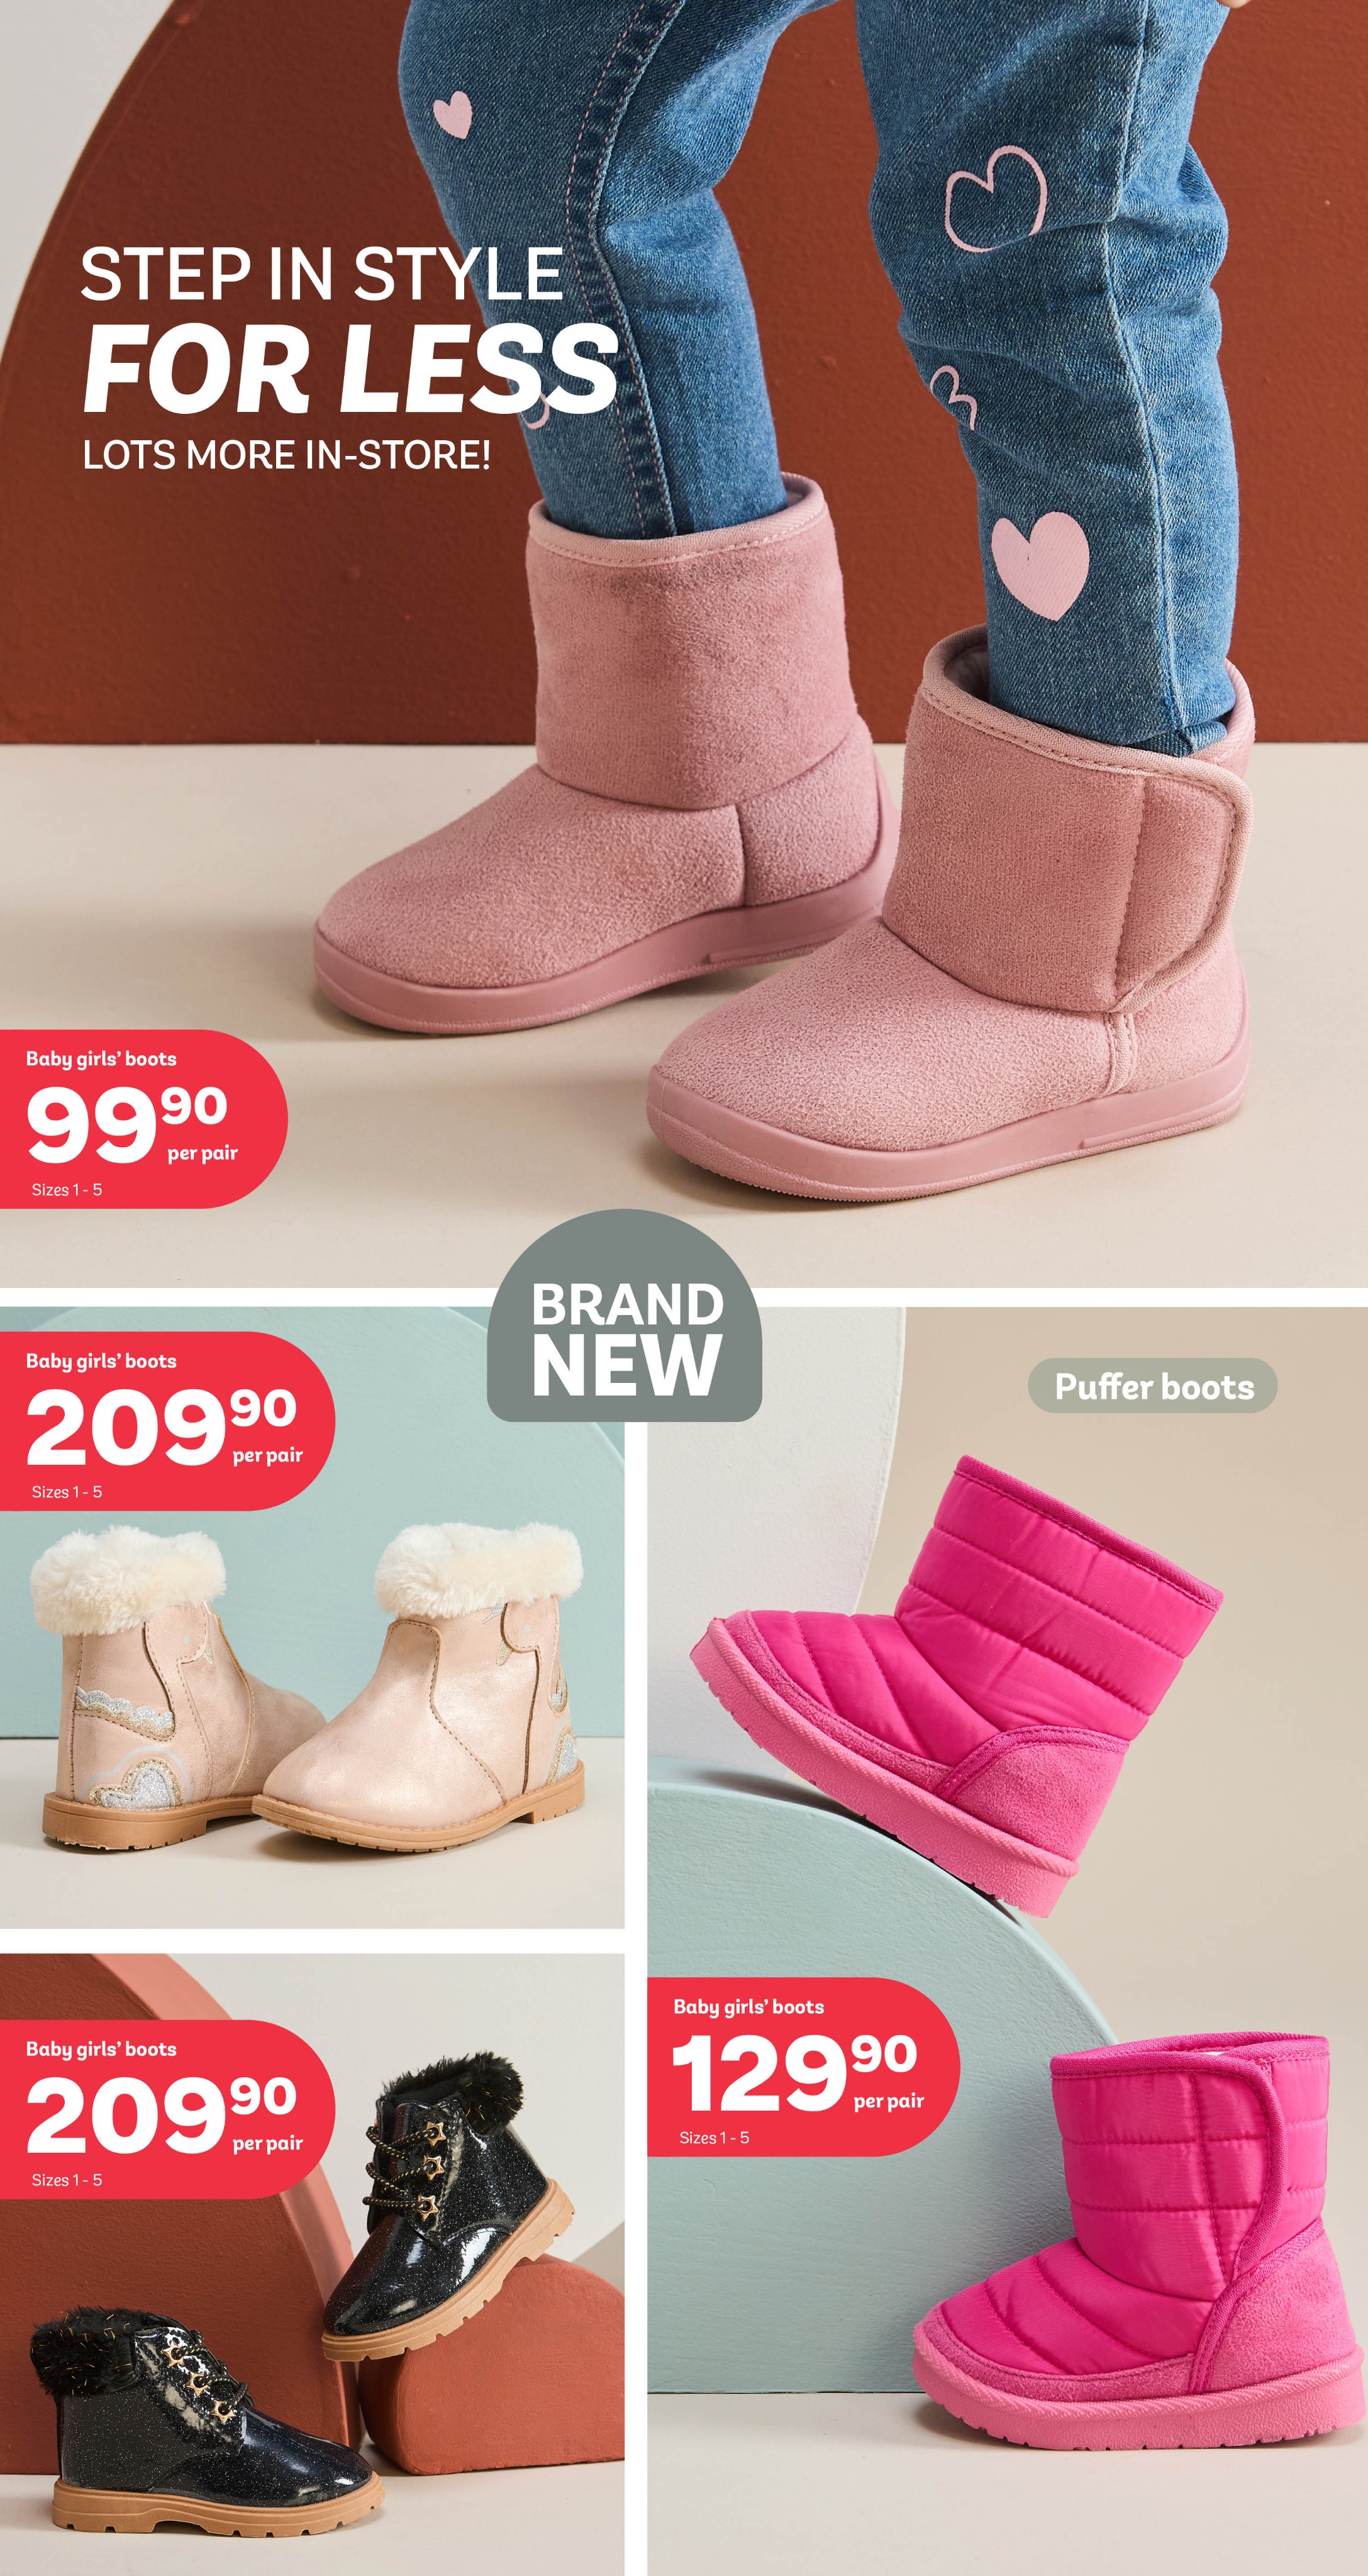 Step in Style for Less - NEW Boots at PEP